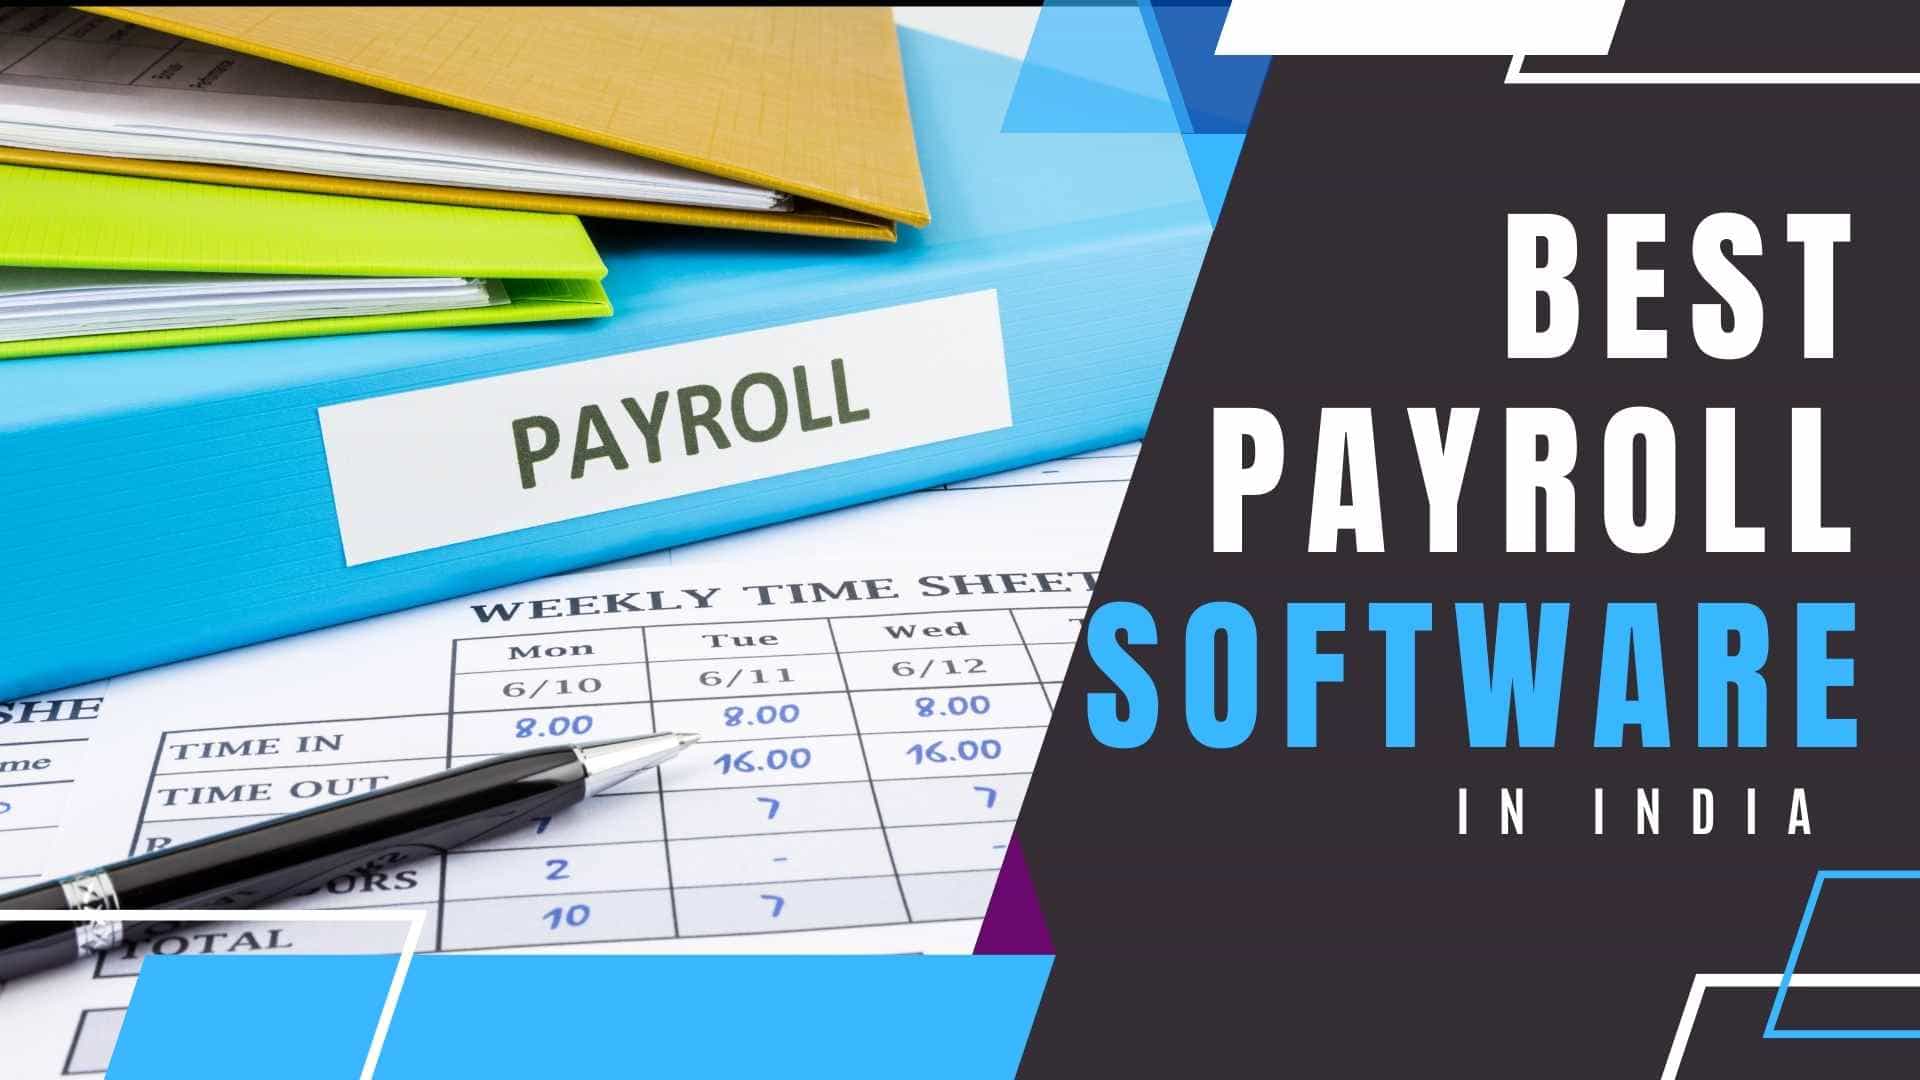 The best payroll software in India? Reviews